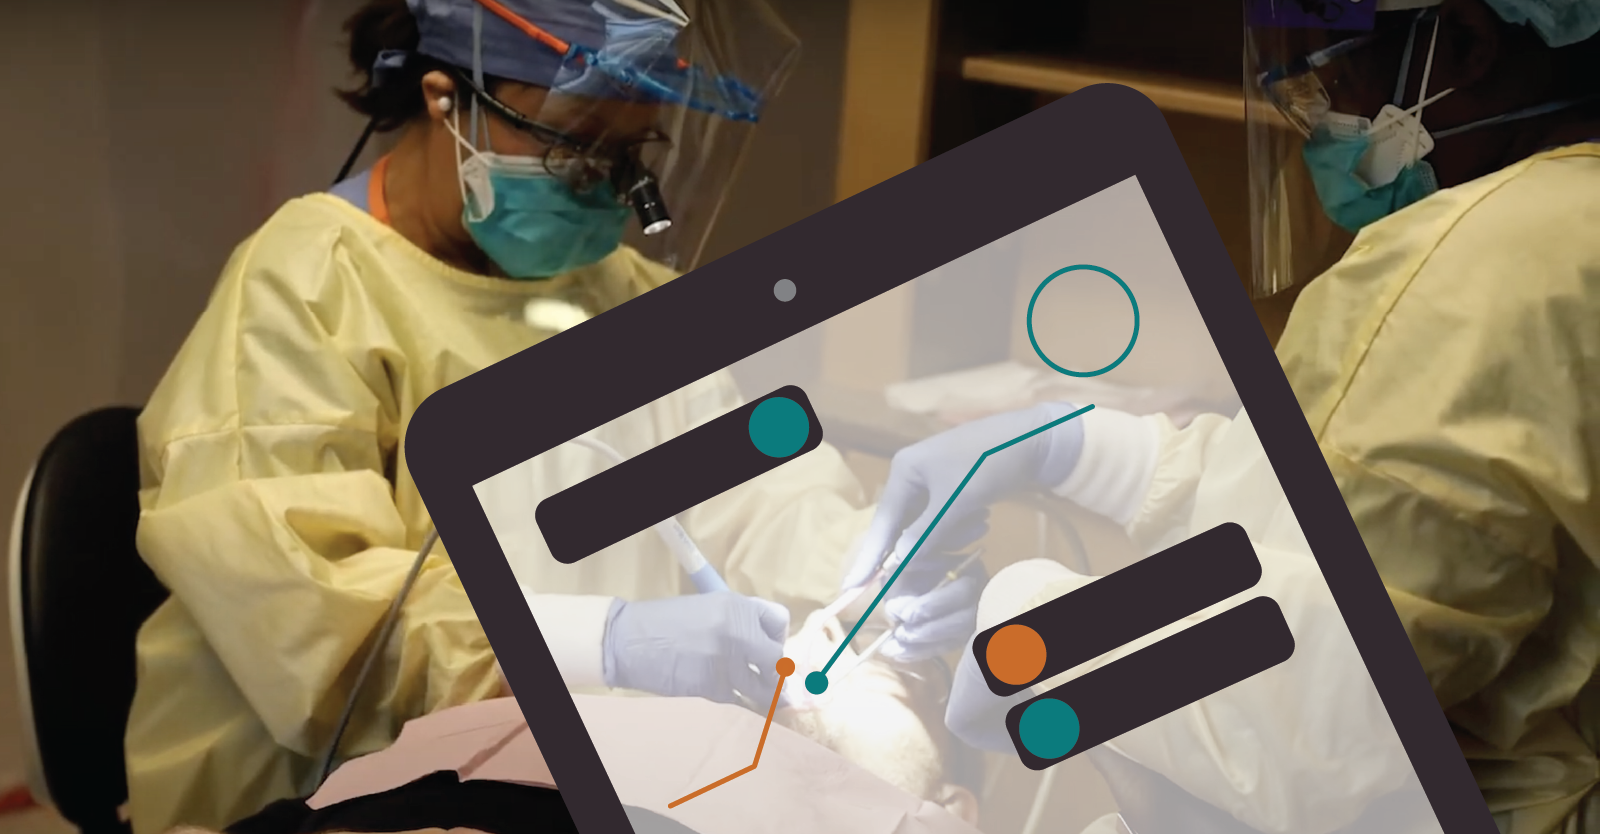 Augmented Reality in the Dental Office - North Carolina Oral Health Collaborative